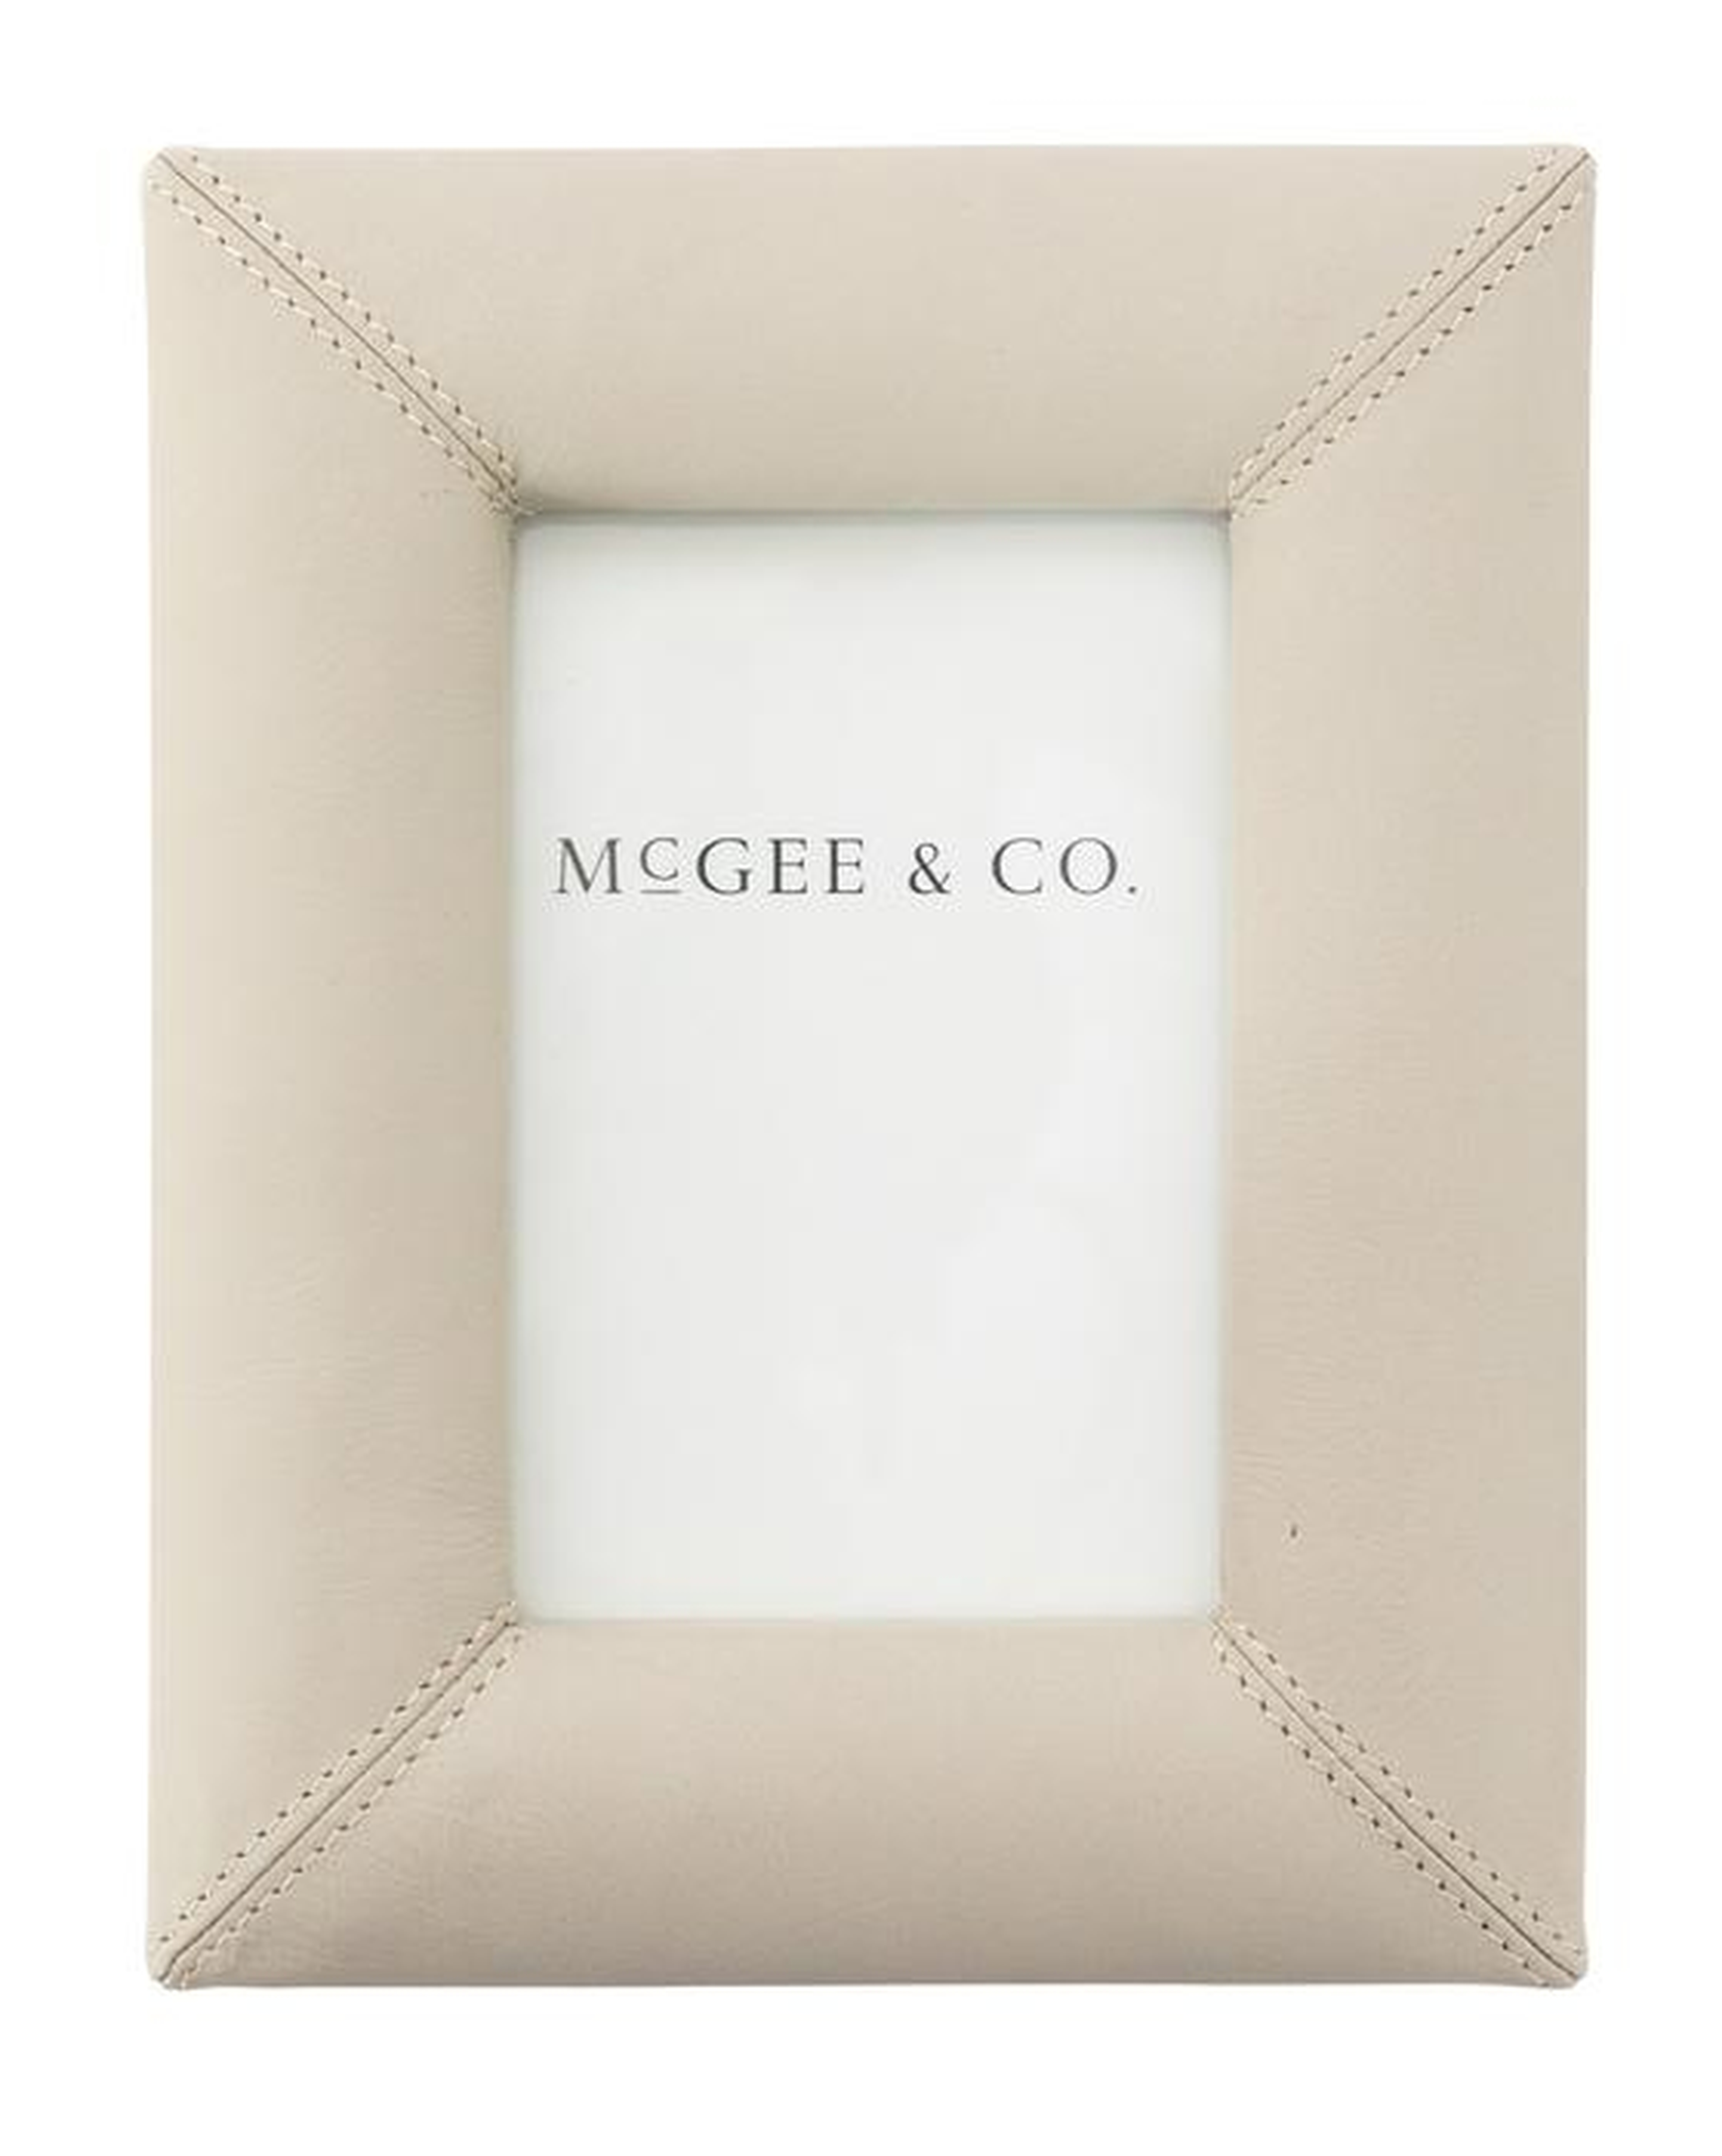 Crafted Leather & Stitch Frame - Small - McGee & Co.